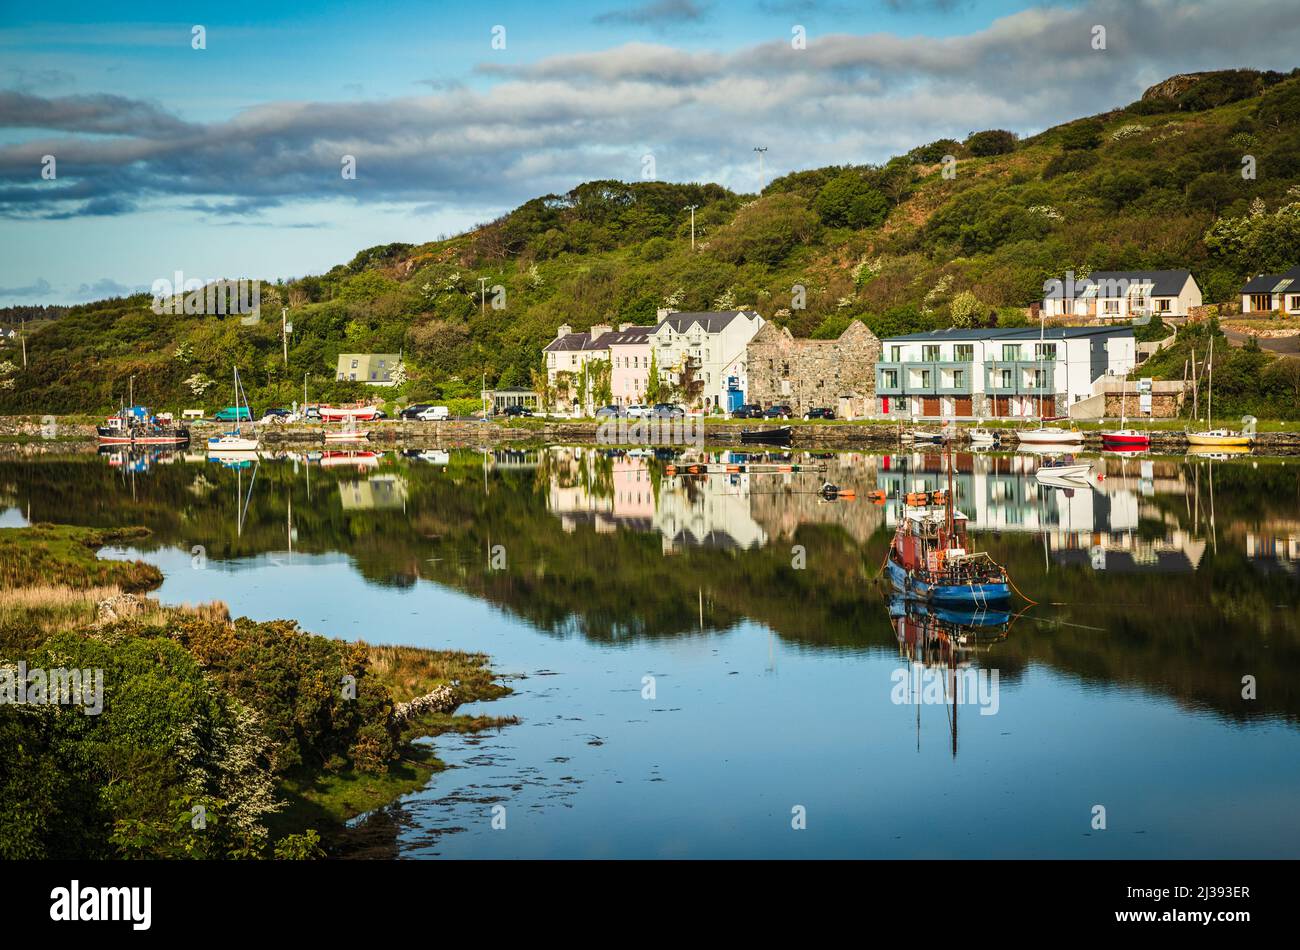 Clifden Harbour, County Galway, Ireland. Clifden (Irish: An Clochán), is located on the Owenglin River where it flows into Clifden Bay. The town was f Stock Photo